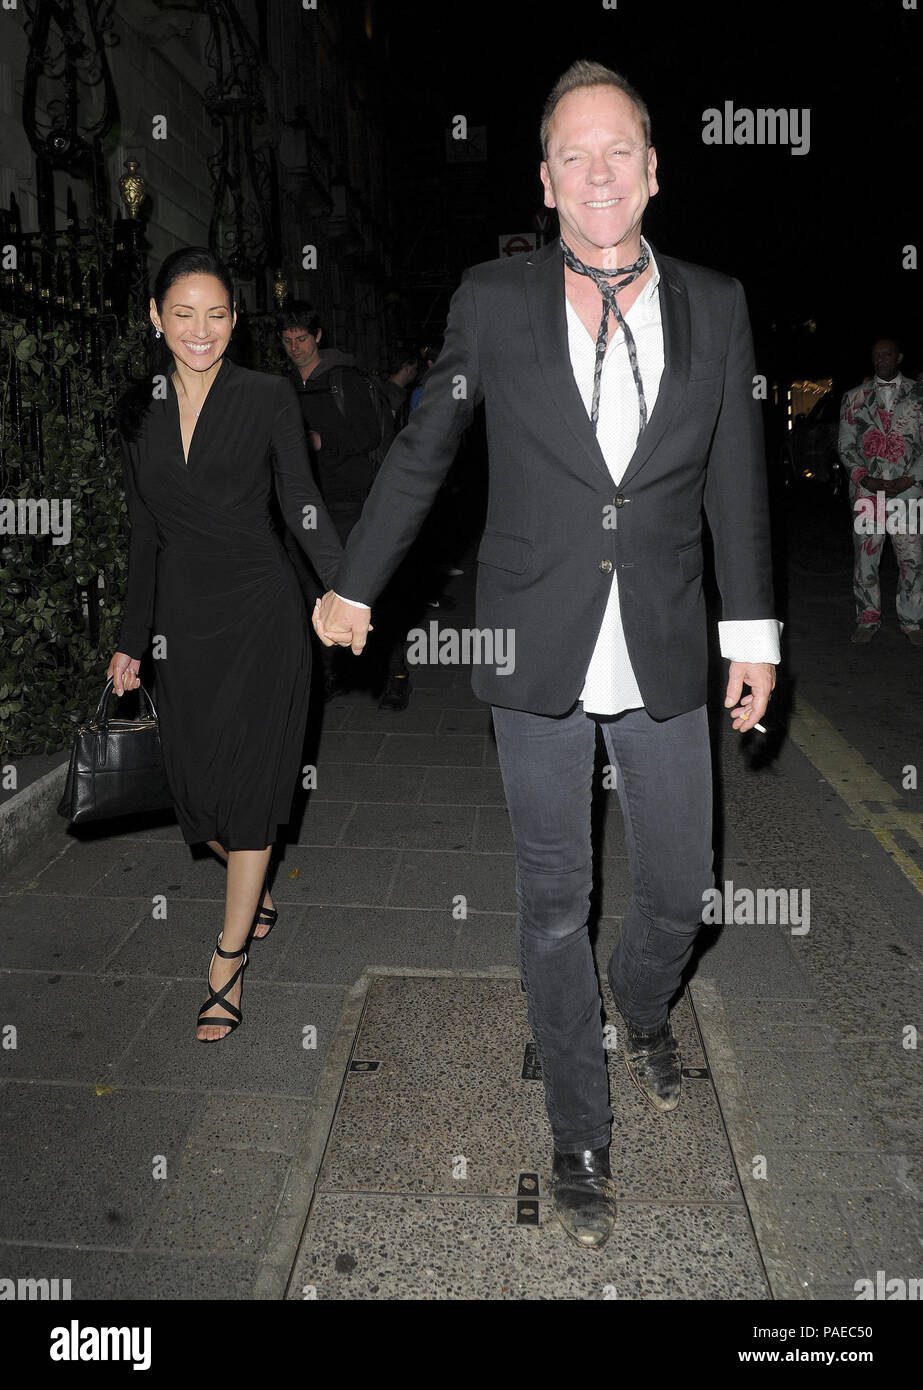 Kiefer Sutherland out and about in Mayfair  Featuring: Kiefer Sutherland, Cindy Vela Where: London, United Kingdom When: 21 Jun 2018 Credit: WENN.com Stock Photo